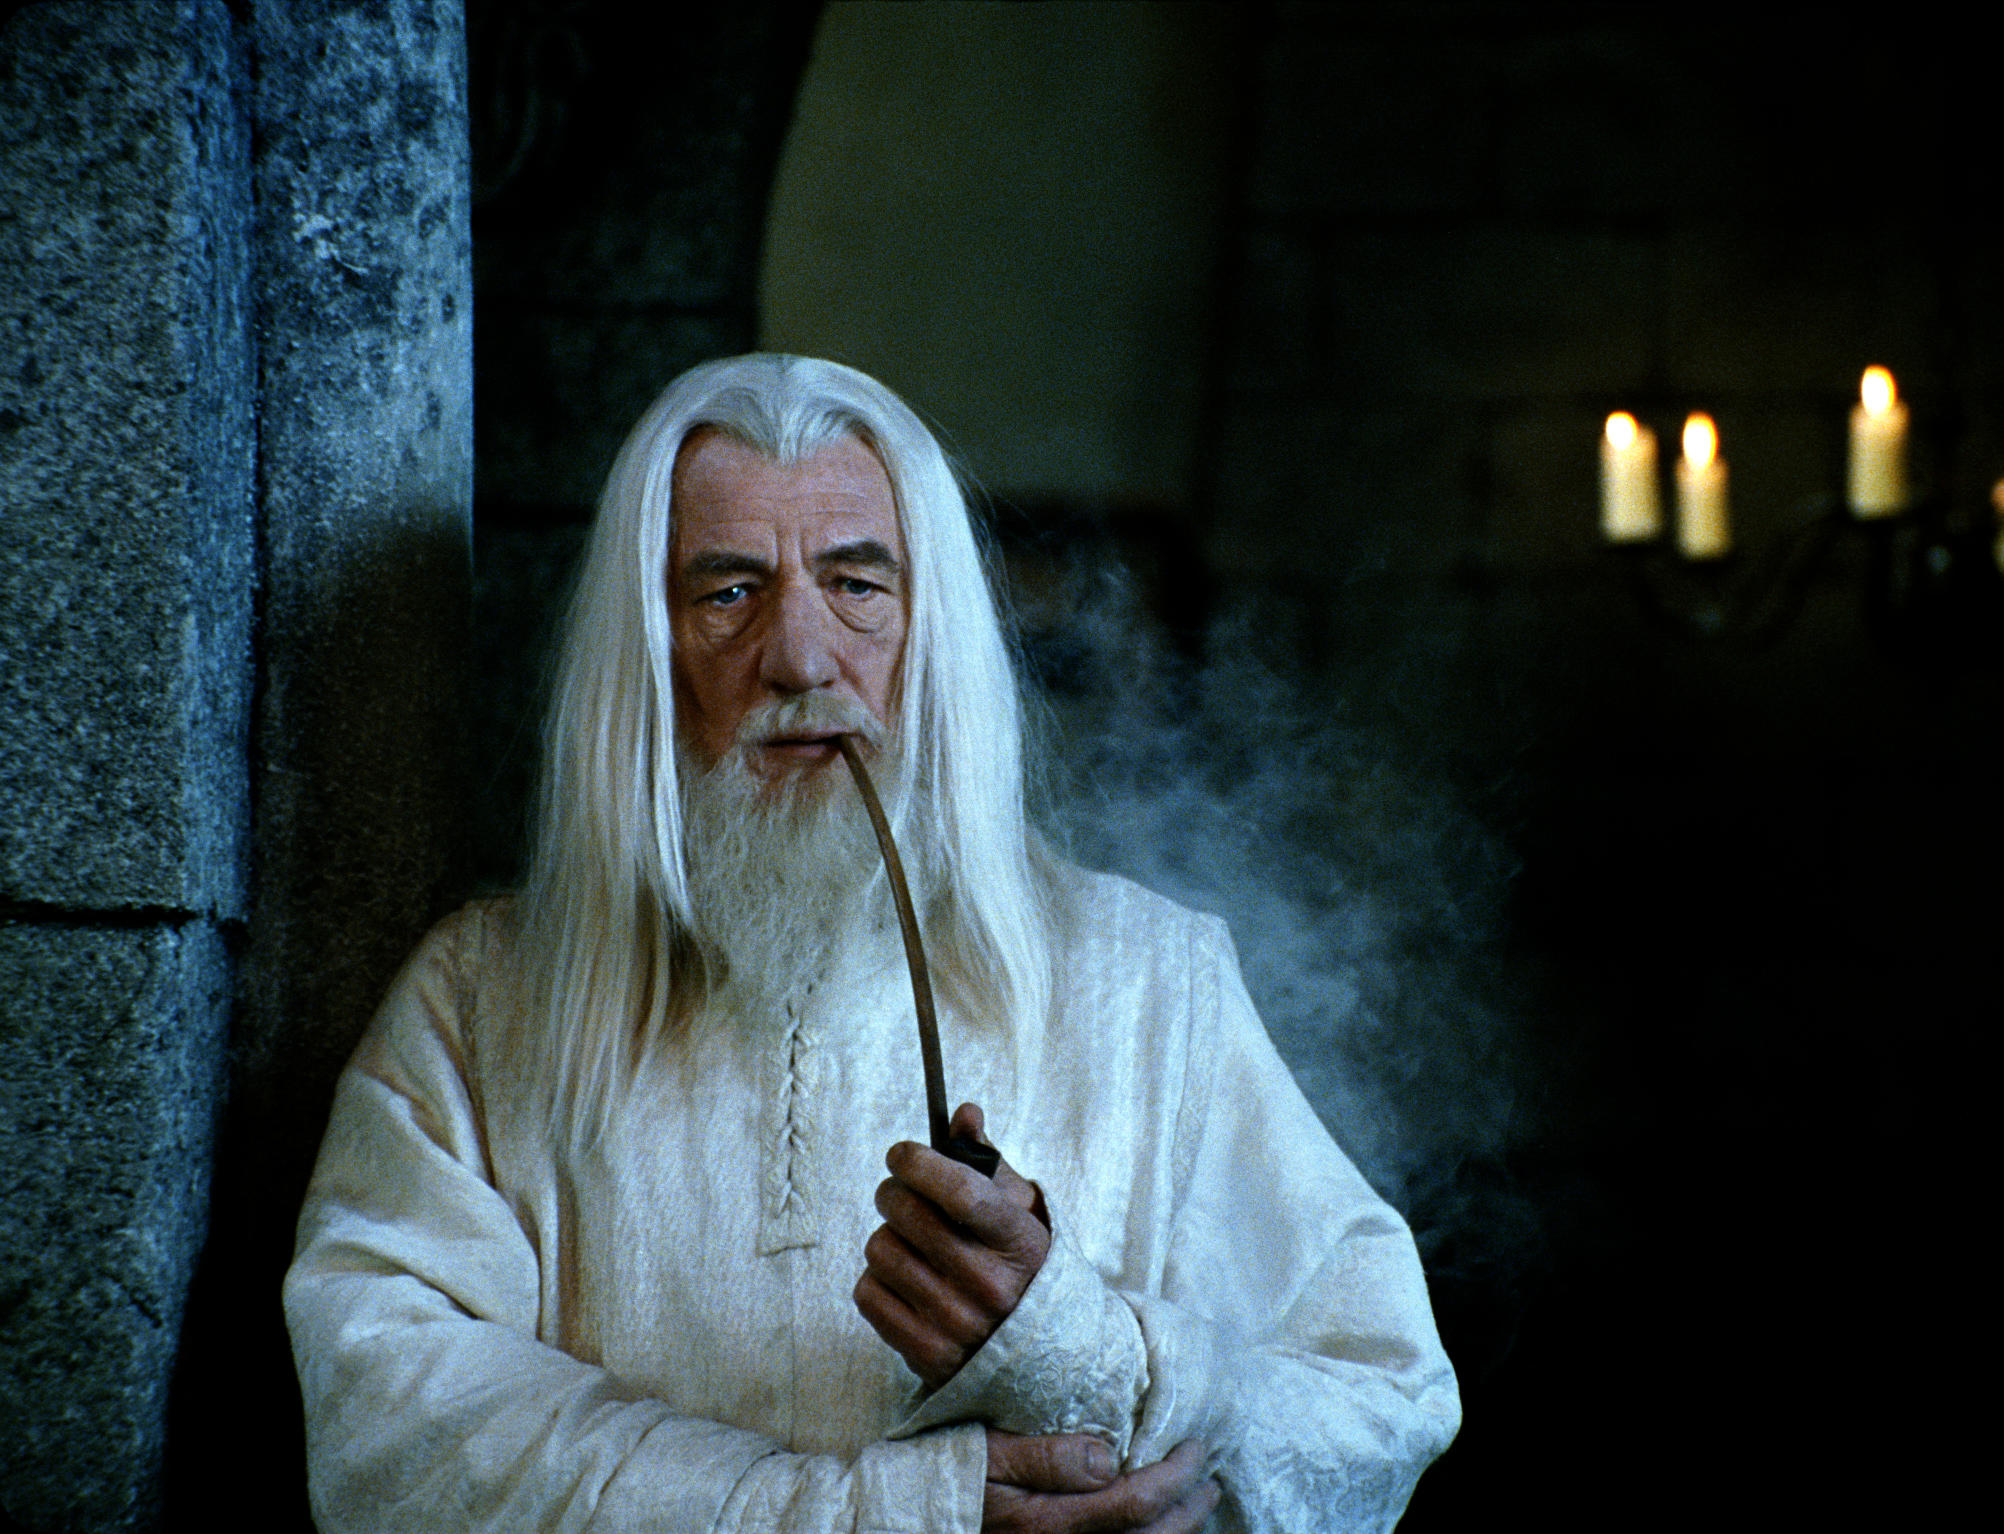 Sir Ian is best known to modern film audiences for playing Gandalf in The Lord of the Rings